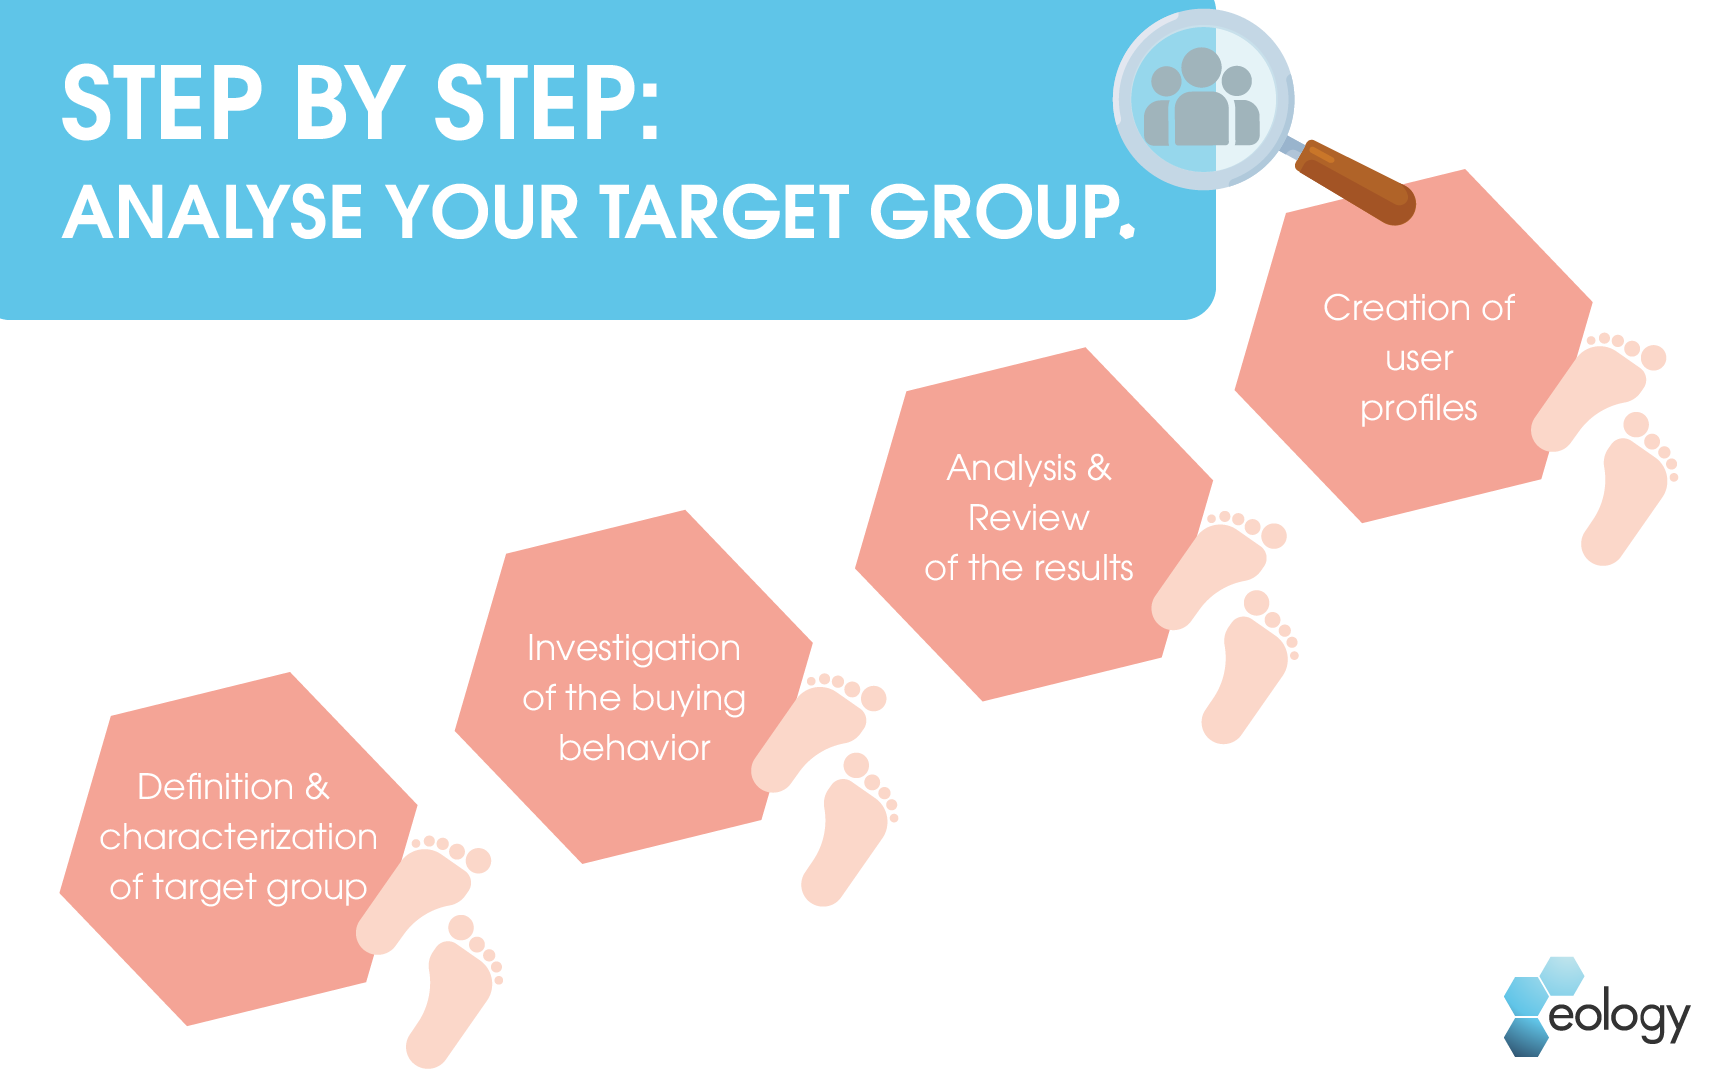 The picture shows the four steps of a target group analysis. These must be analyzed in order to draw accurate conclusions about one's own target group. The first step is therefore to define and characterize the target group. The next step is to examine the buying behavior, after which these results must be analyzed and checked again in detail. In the last step, user profiles are created and the target group analysis is finished.